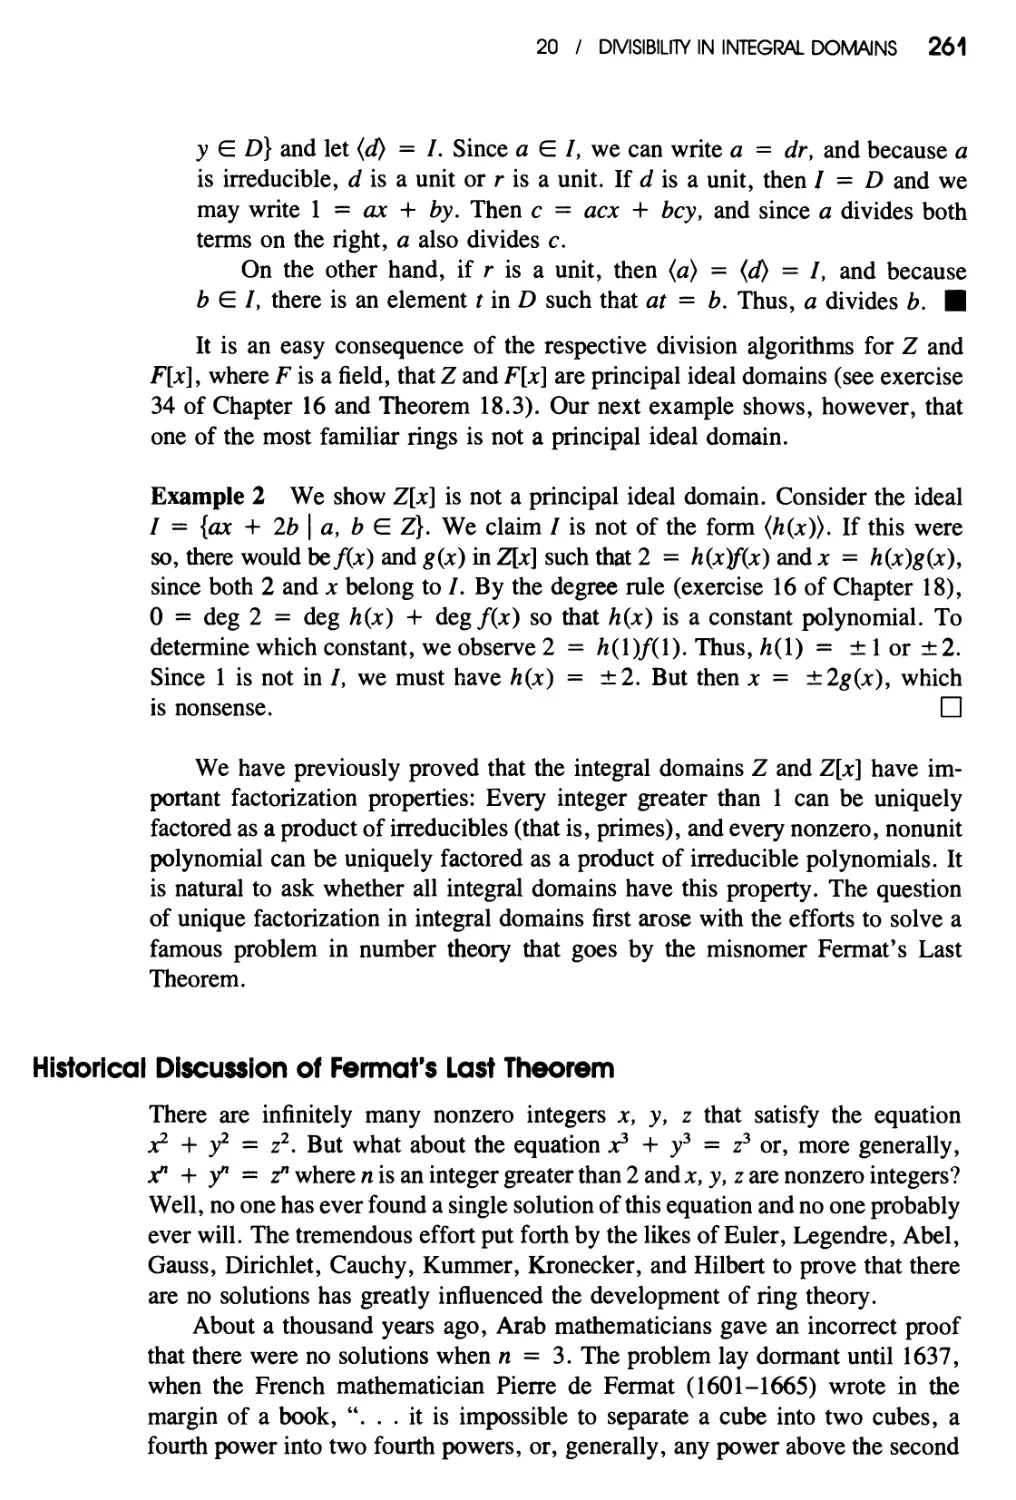 Historical Discussion of Fermat's Last Theorem